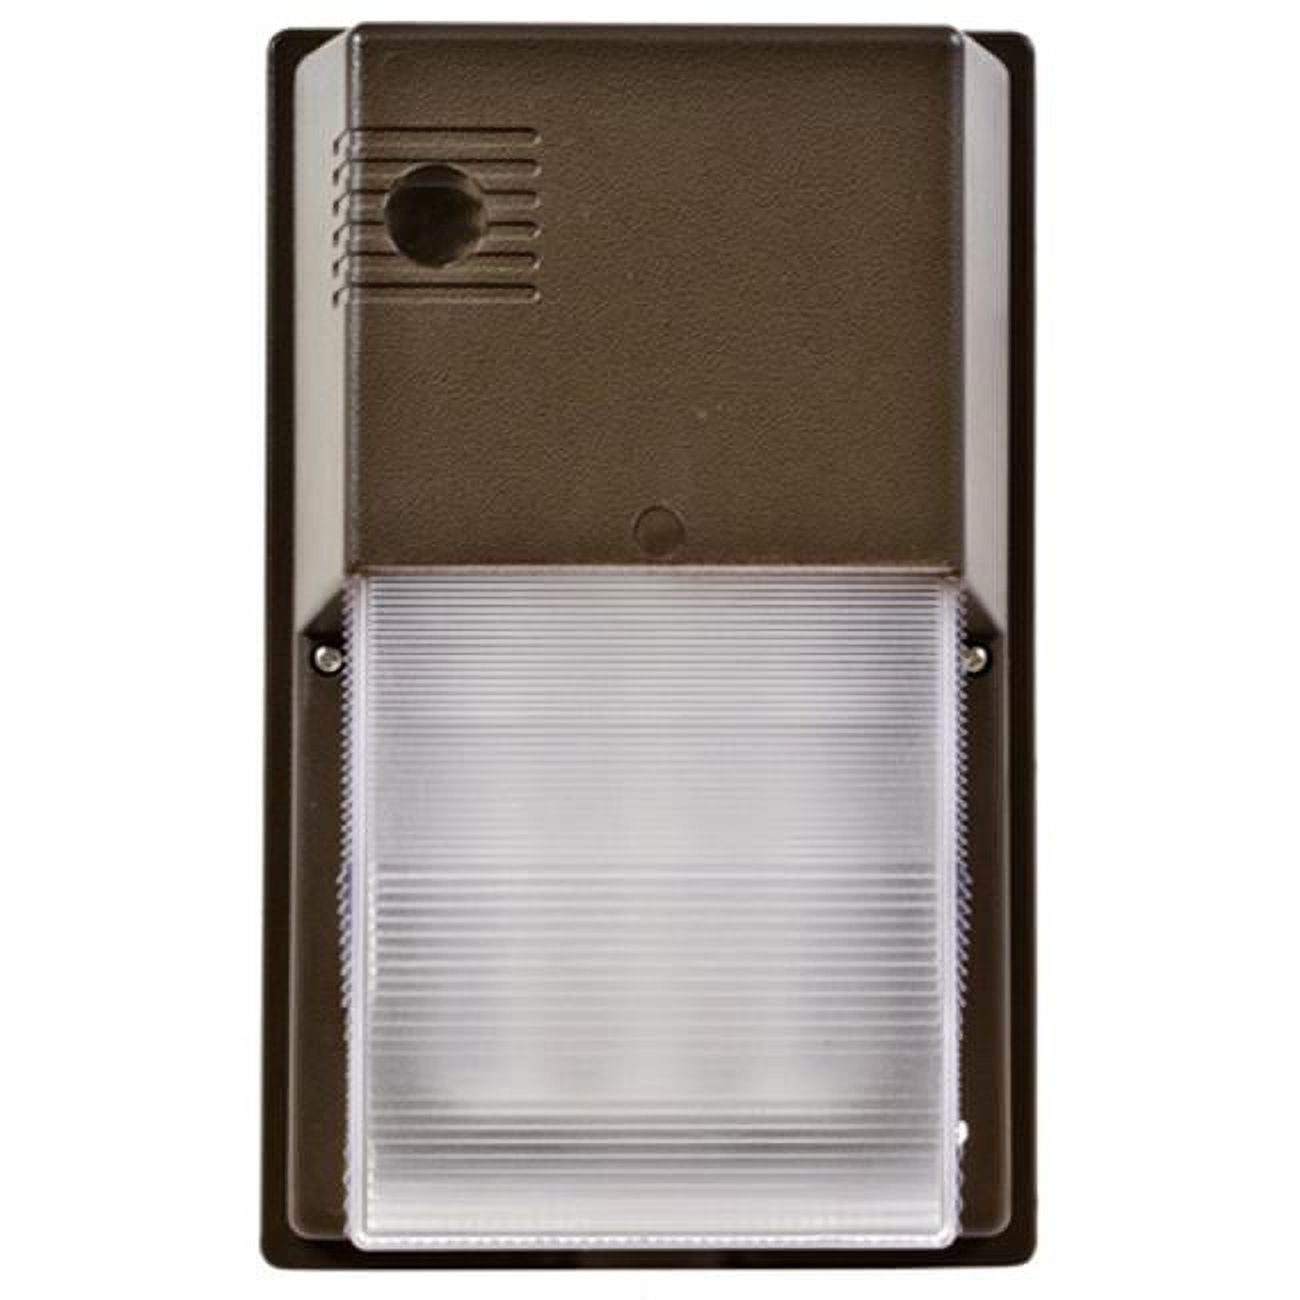 Picture of Dabmar Lighting DF-LED6722-BZ Polycarbonate Surface Mounted Wall Fixture, Bronze - 10.88 x 6.81 x 5.25 in.